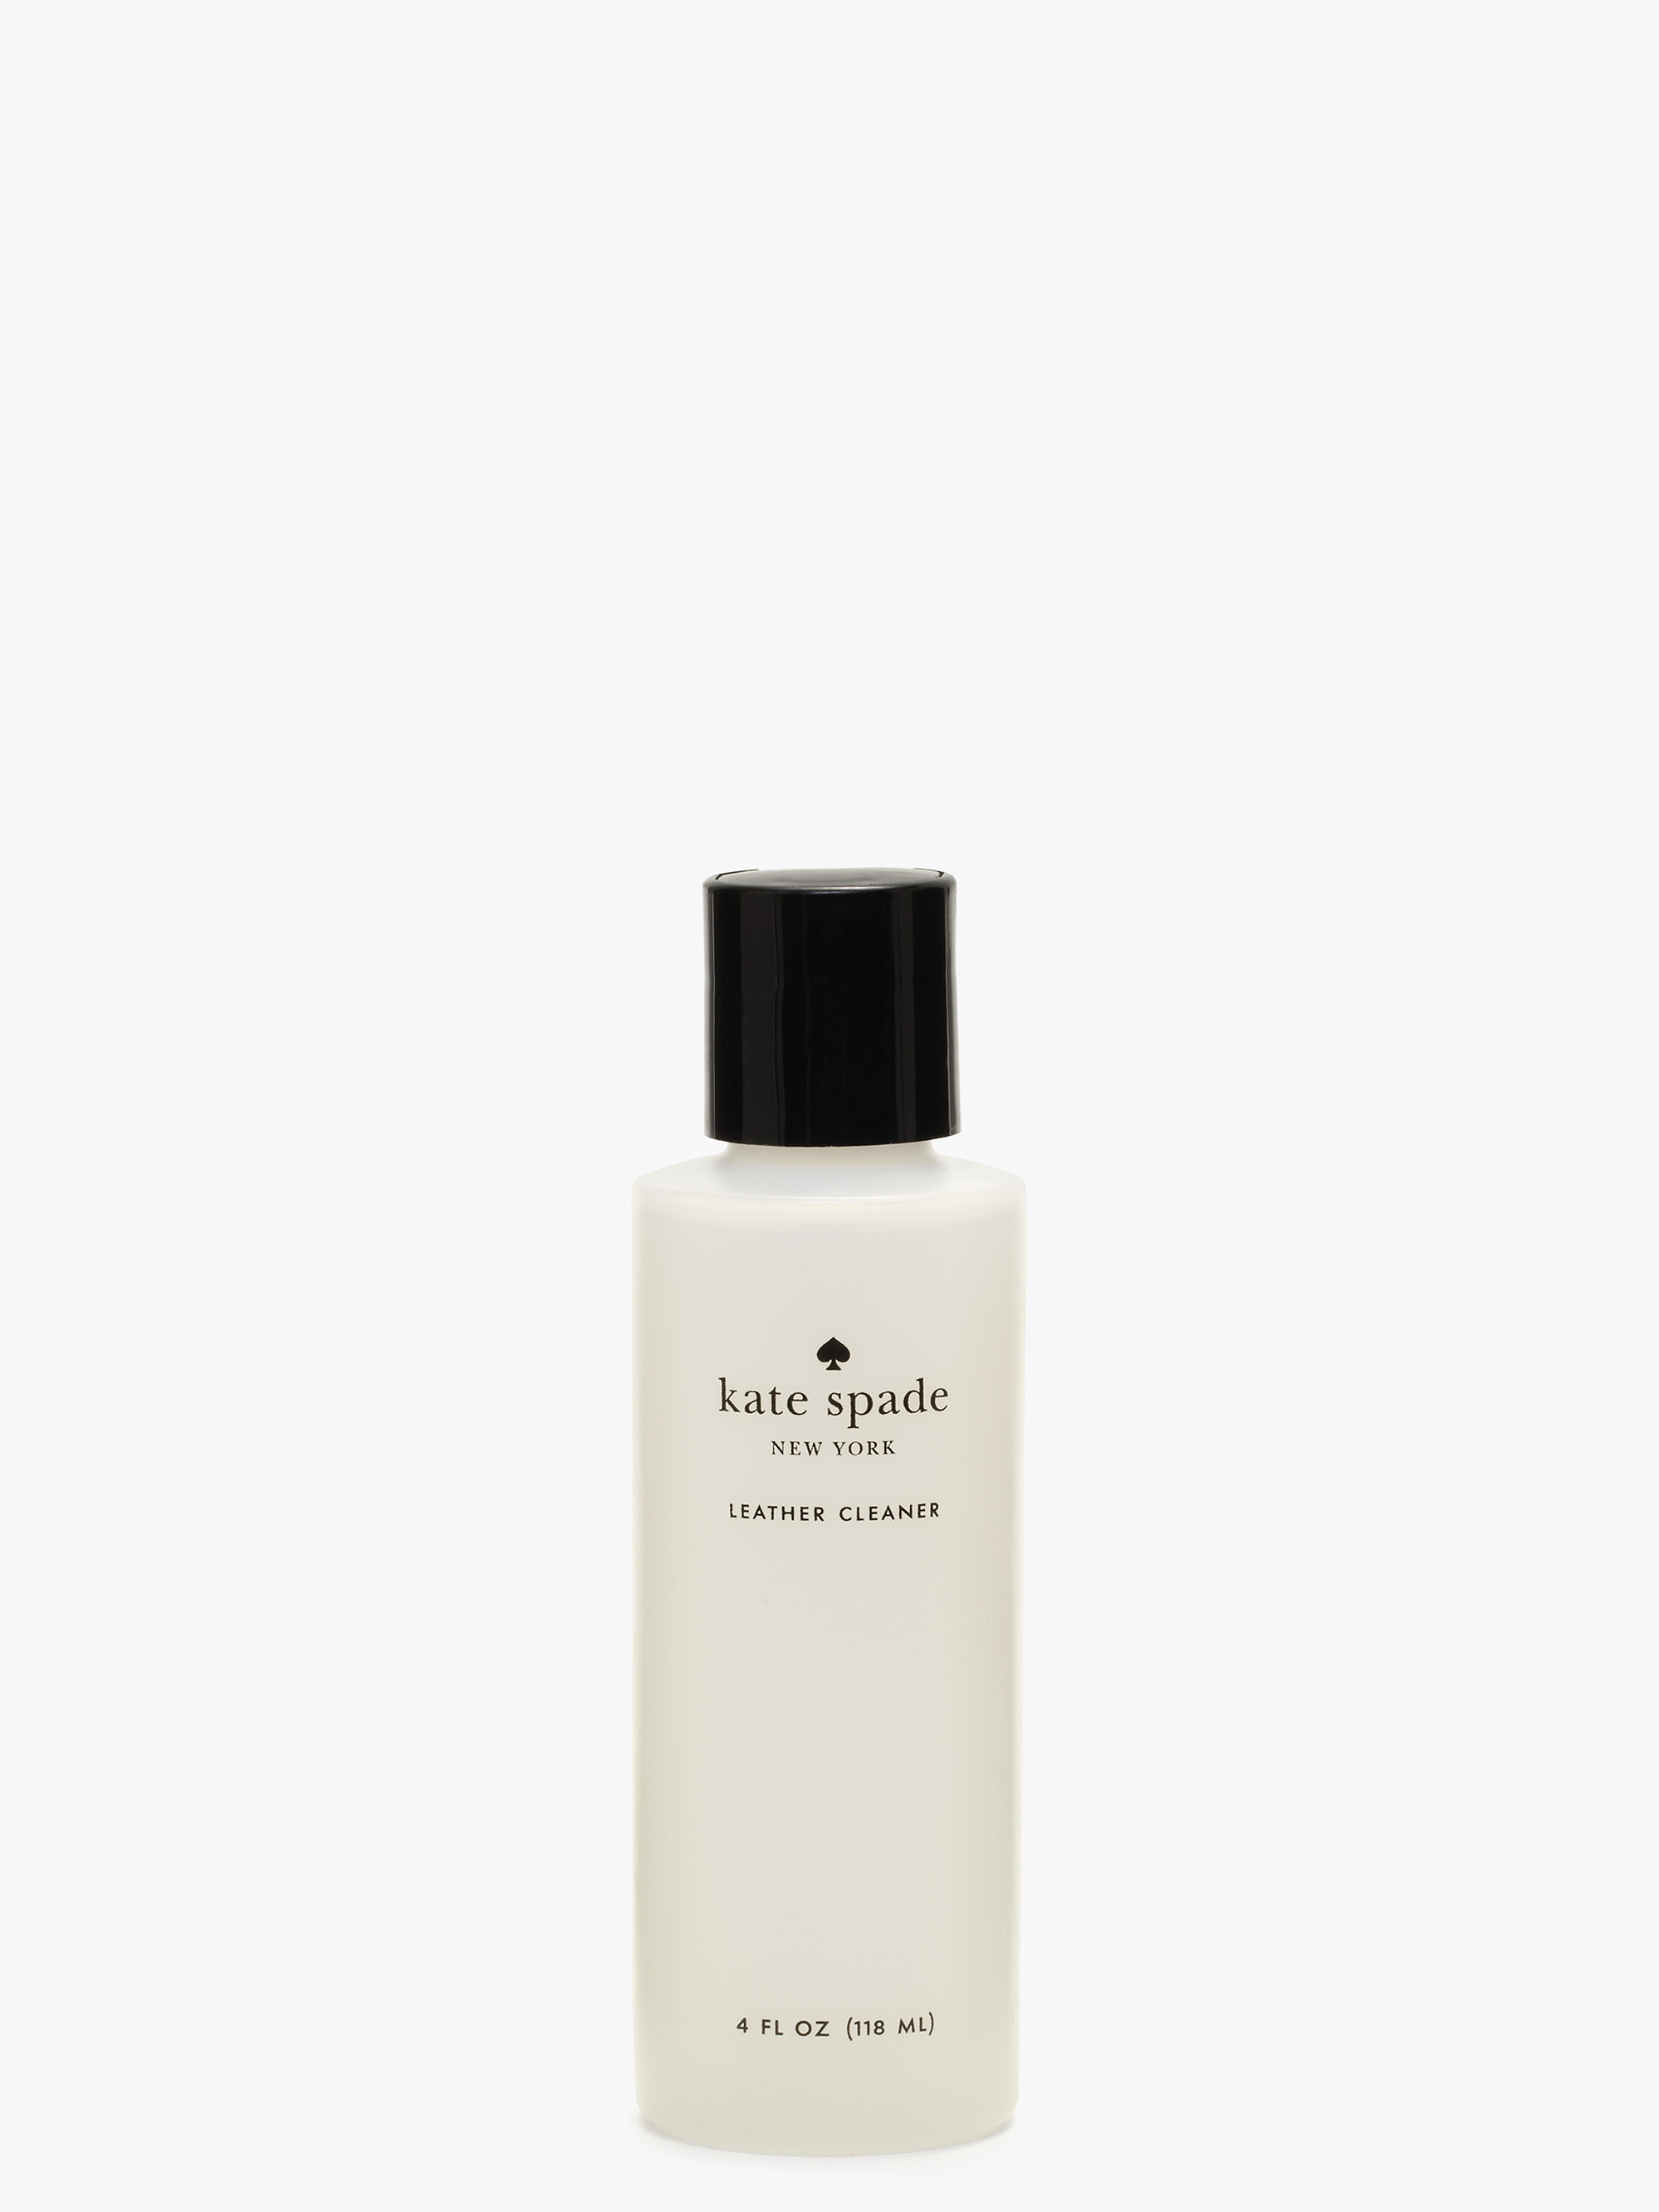 Kate Spade Leather Cleaner